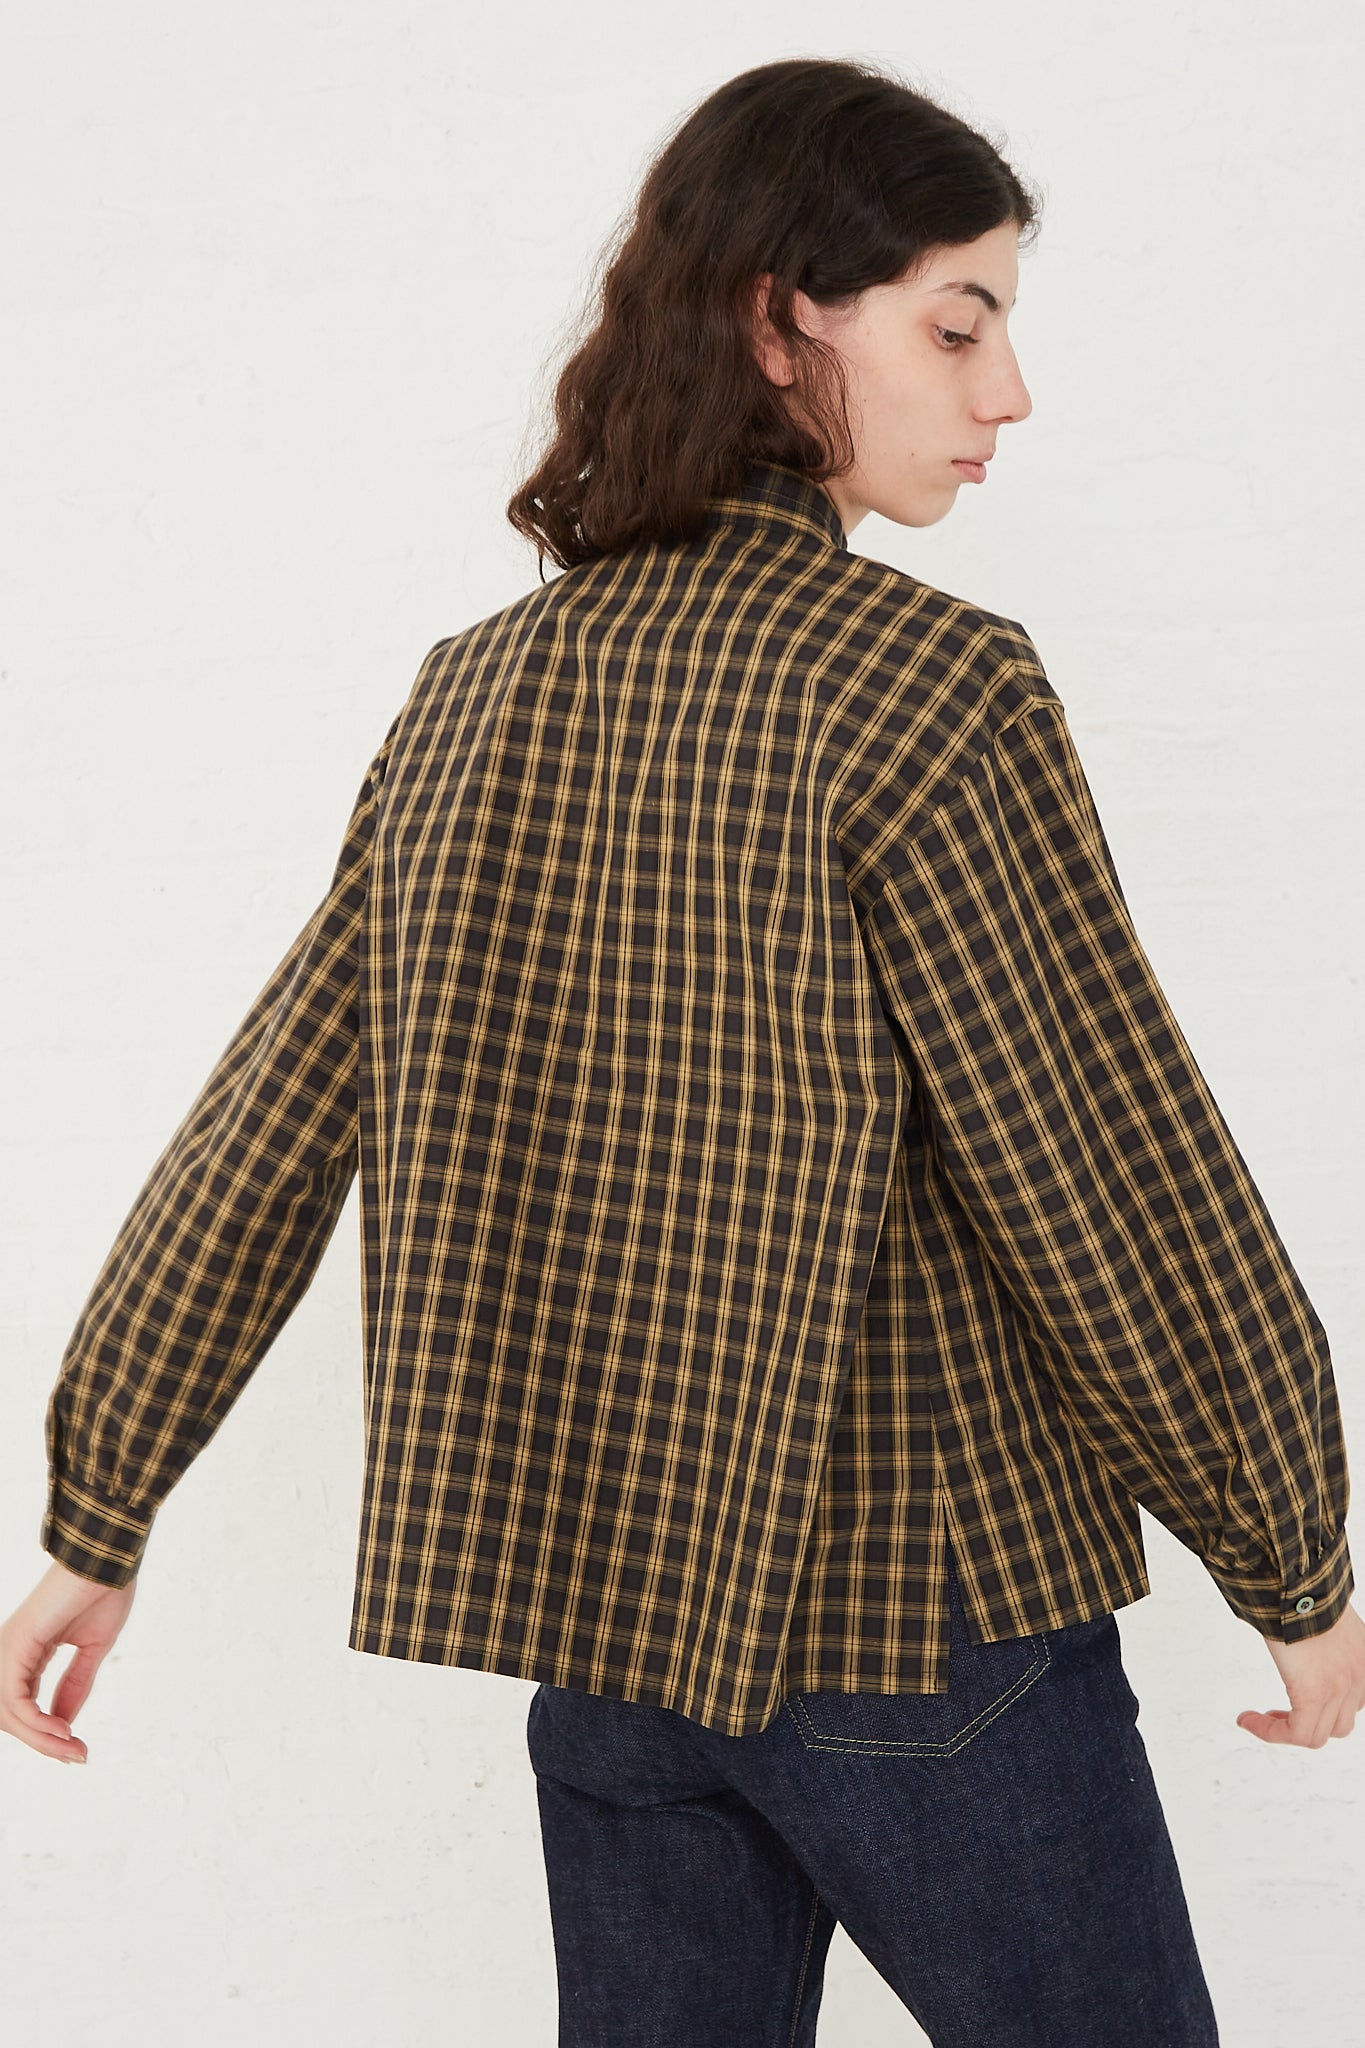 CHIMALA Pleated Stand Collar Shirt in Yellow Check - Oroboro Store | Back view and full length. Model's arms raised to the side. 